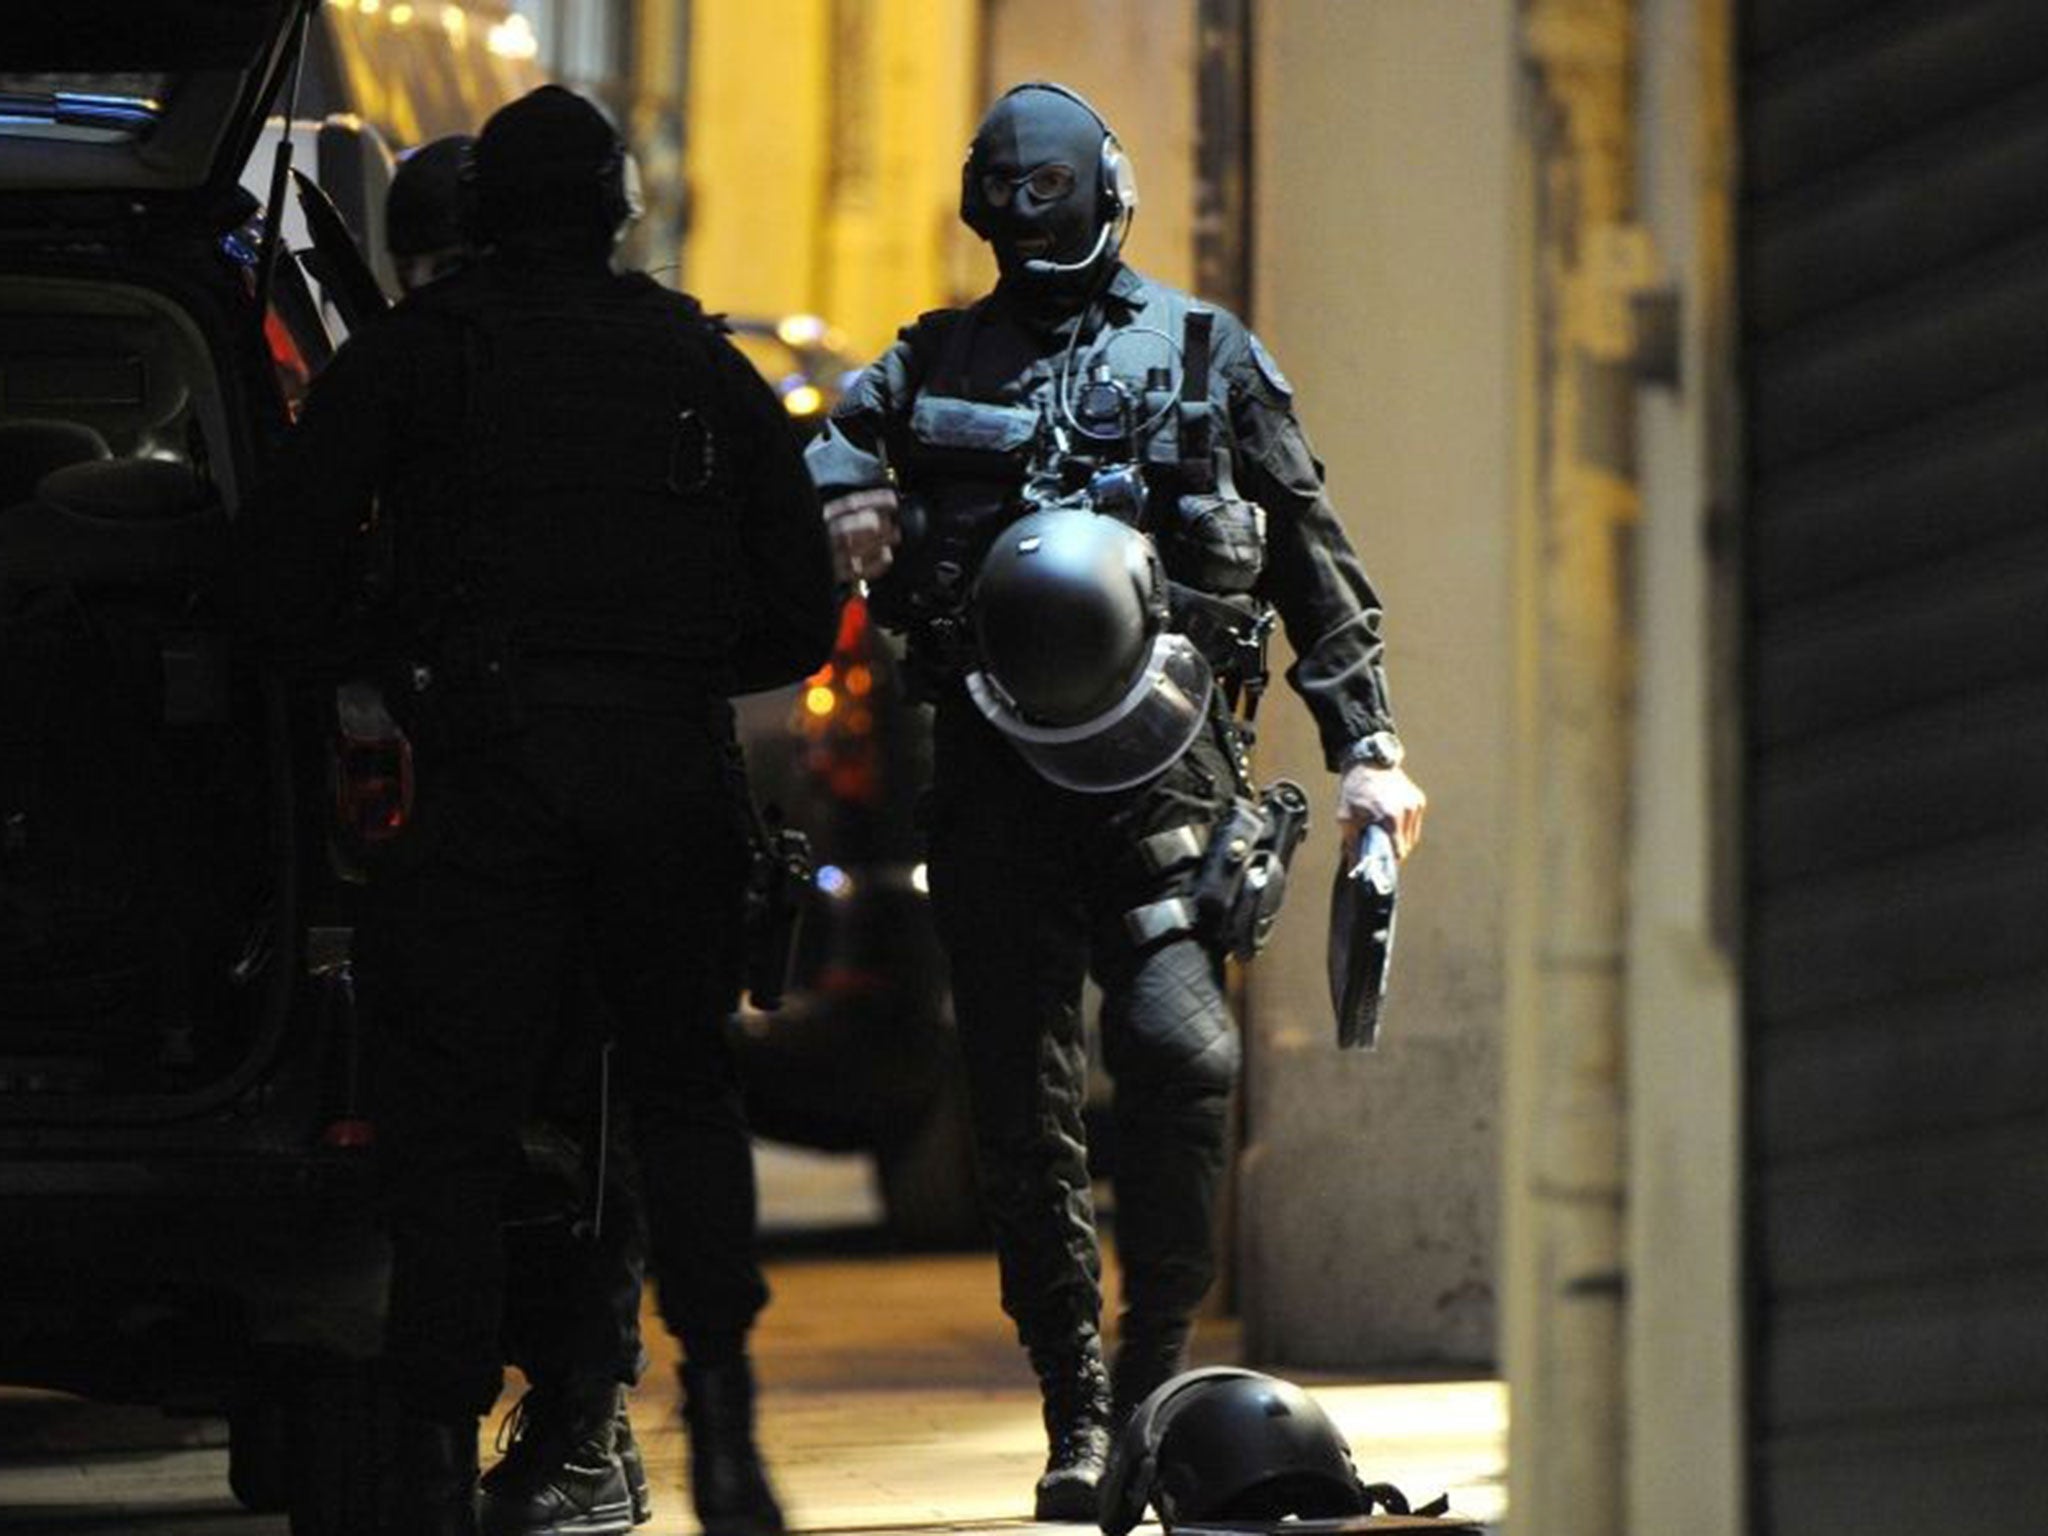 French police special forces arrive near a jewellery store where two people were being held hostage by a gunman attempting a robbery on 9 January